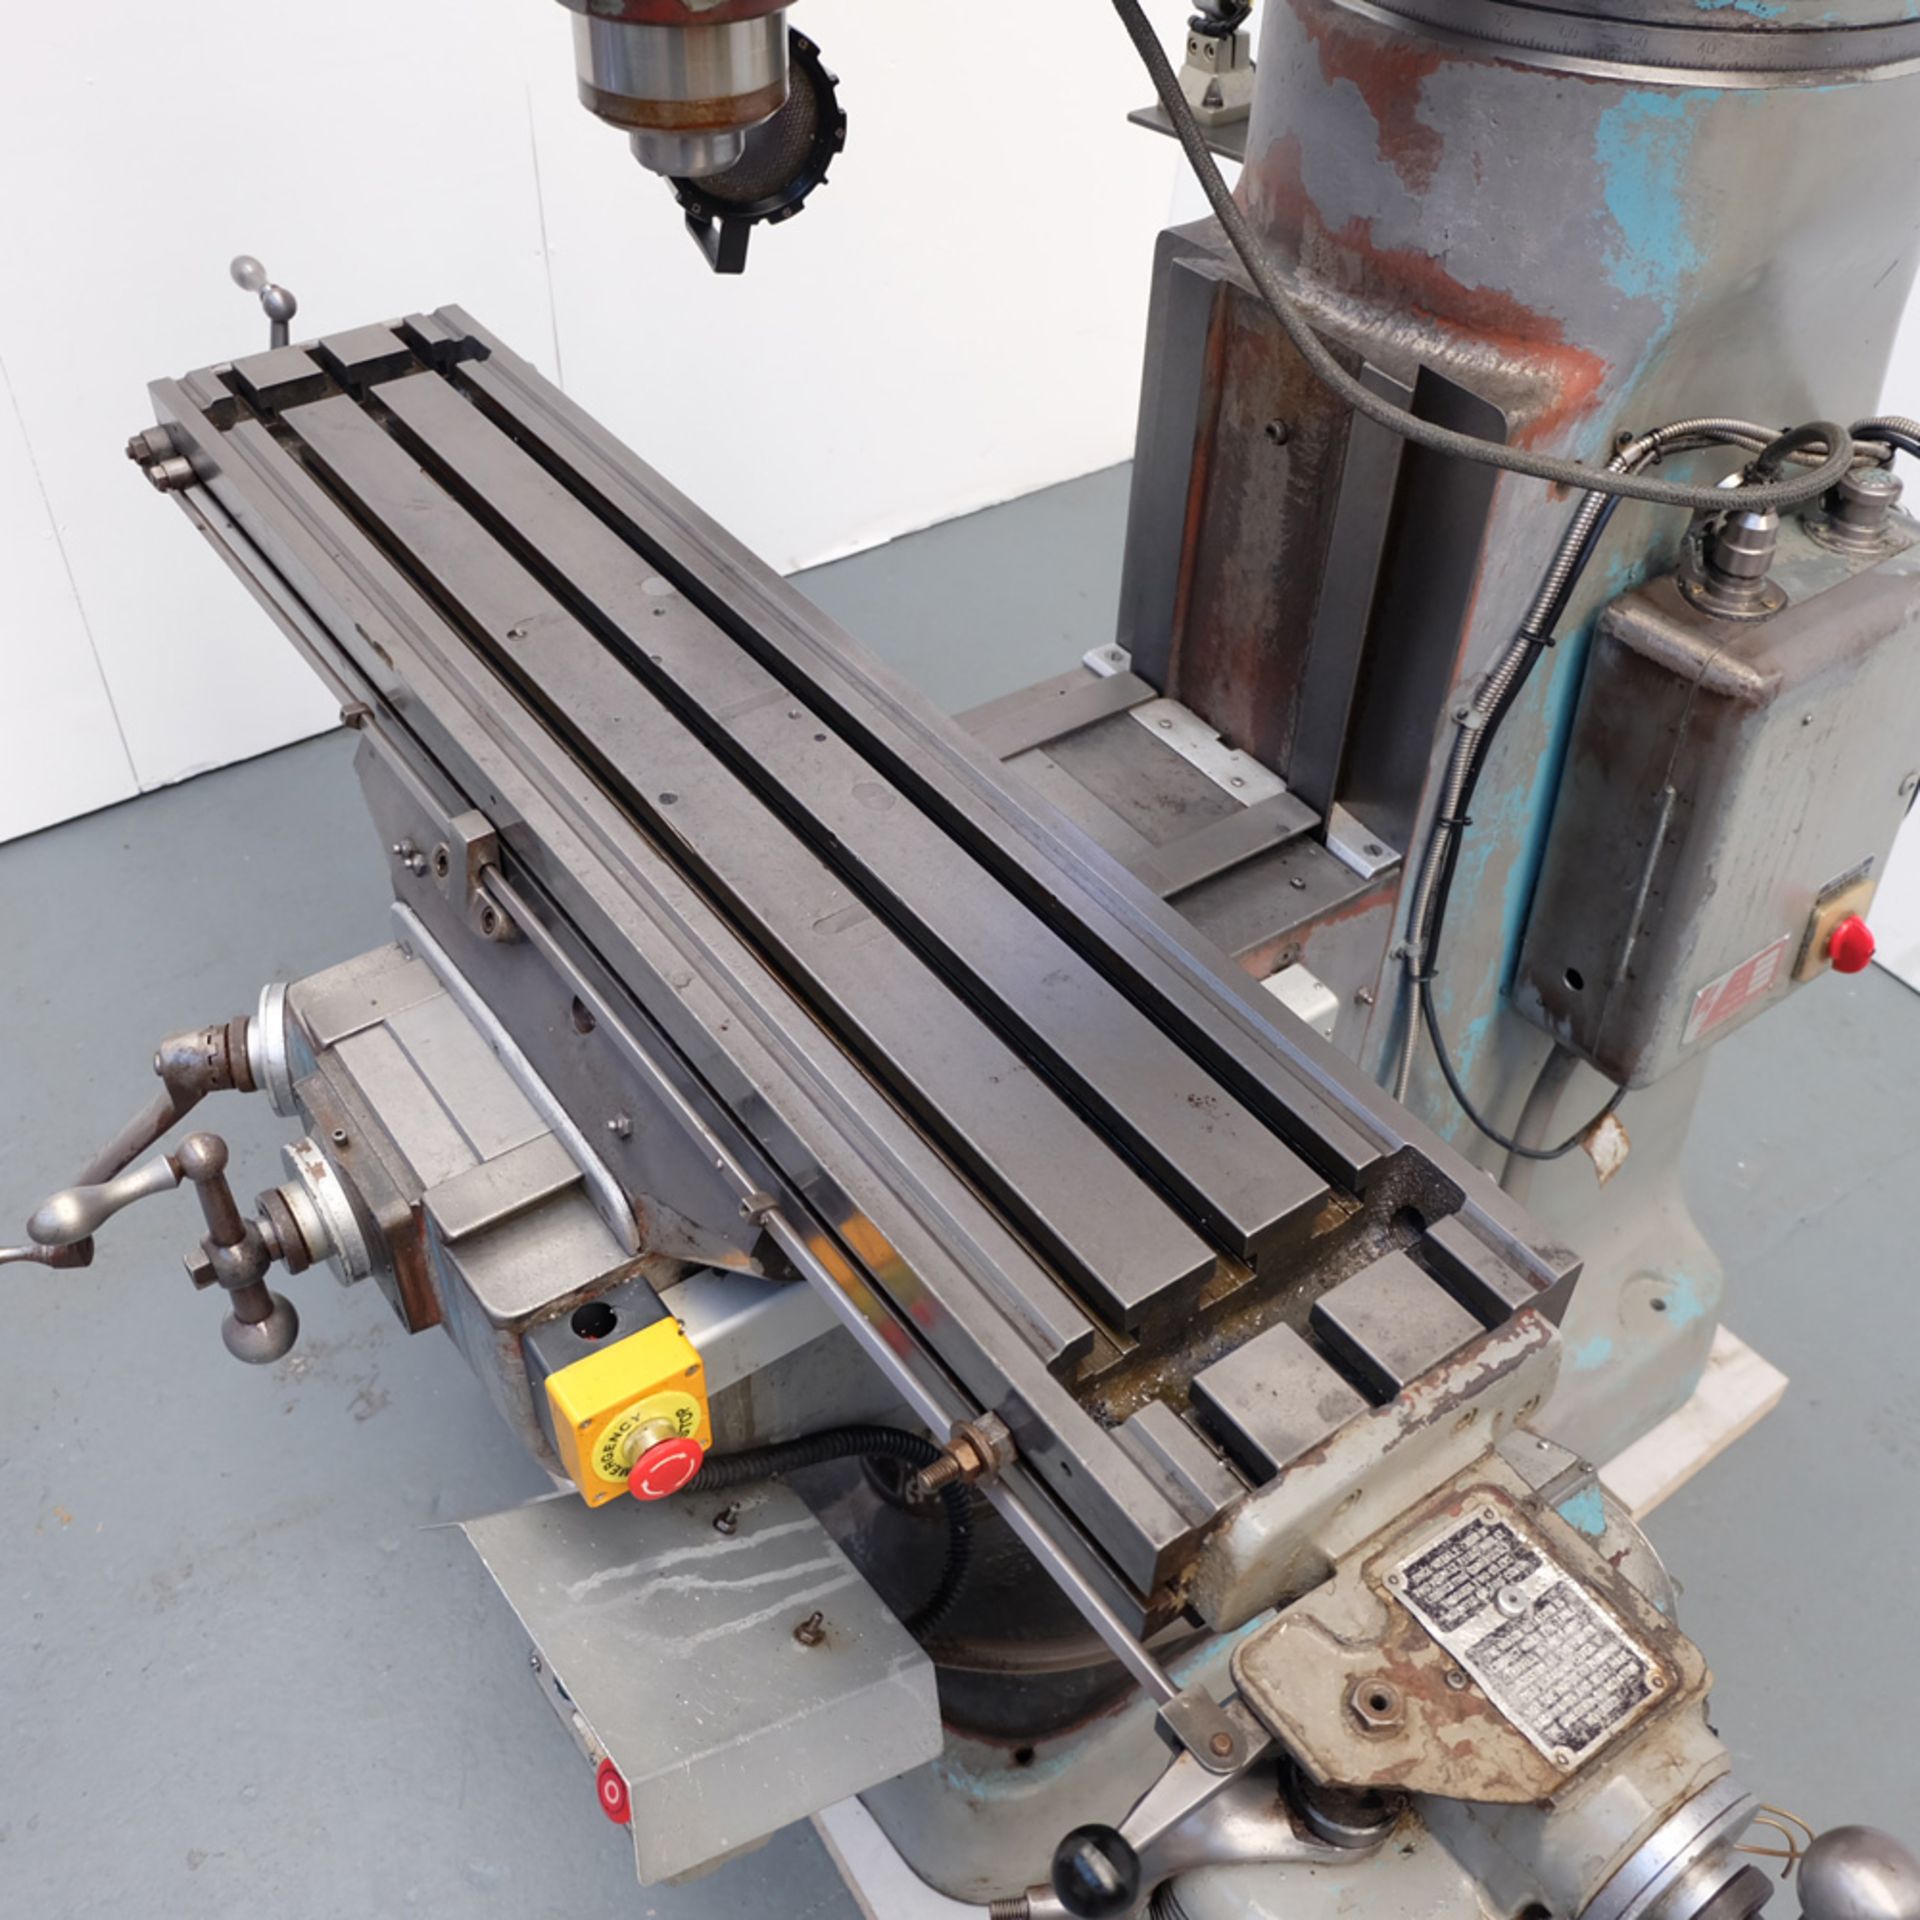 Bridgeport J Type Turret Milling Machine. Table Size 42" x 9". Spindle Taper R8. - Image 6 of 9